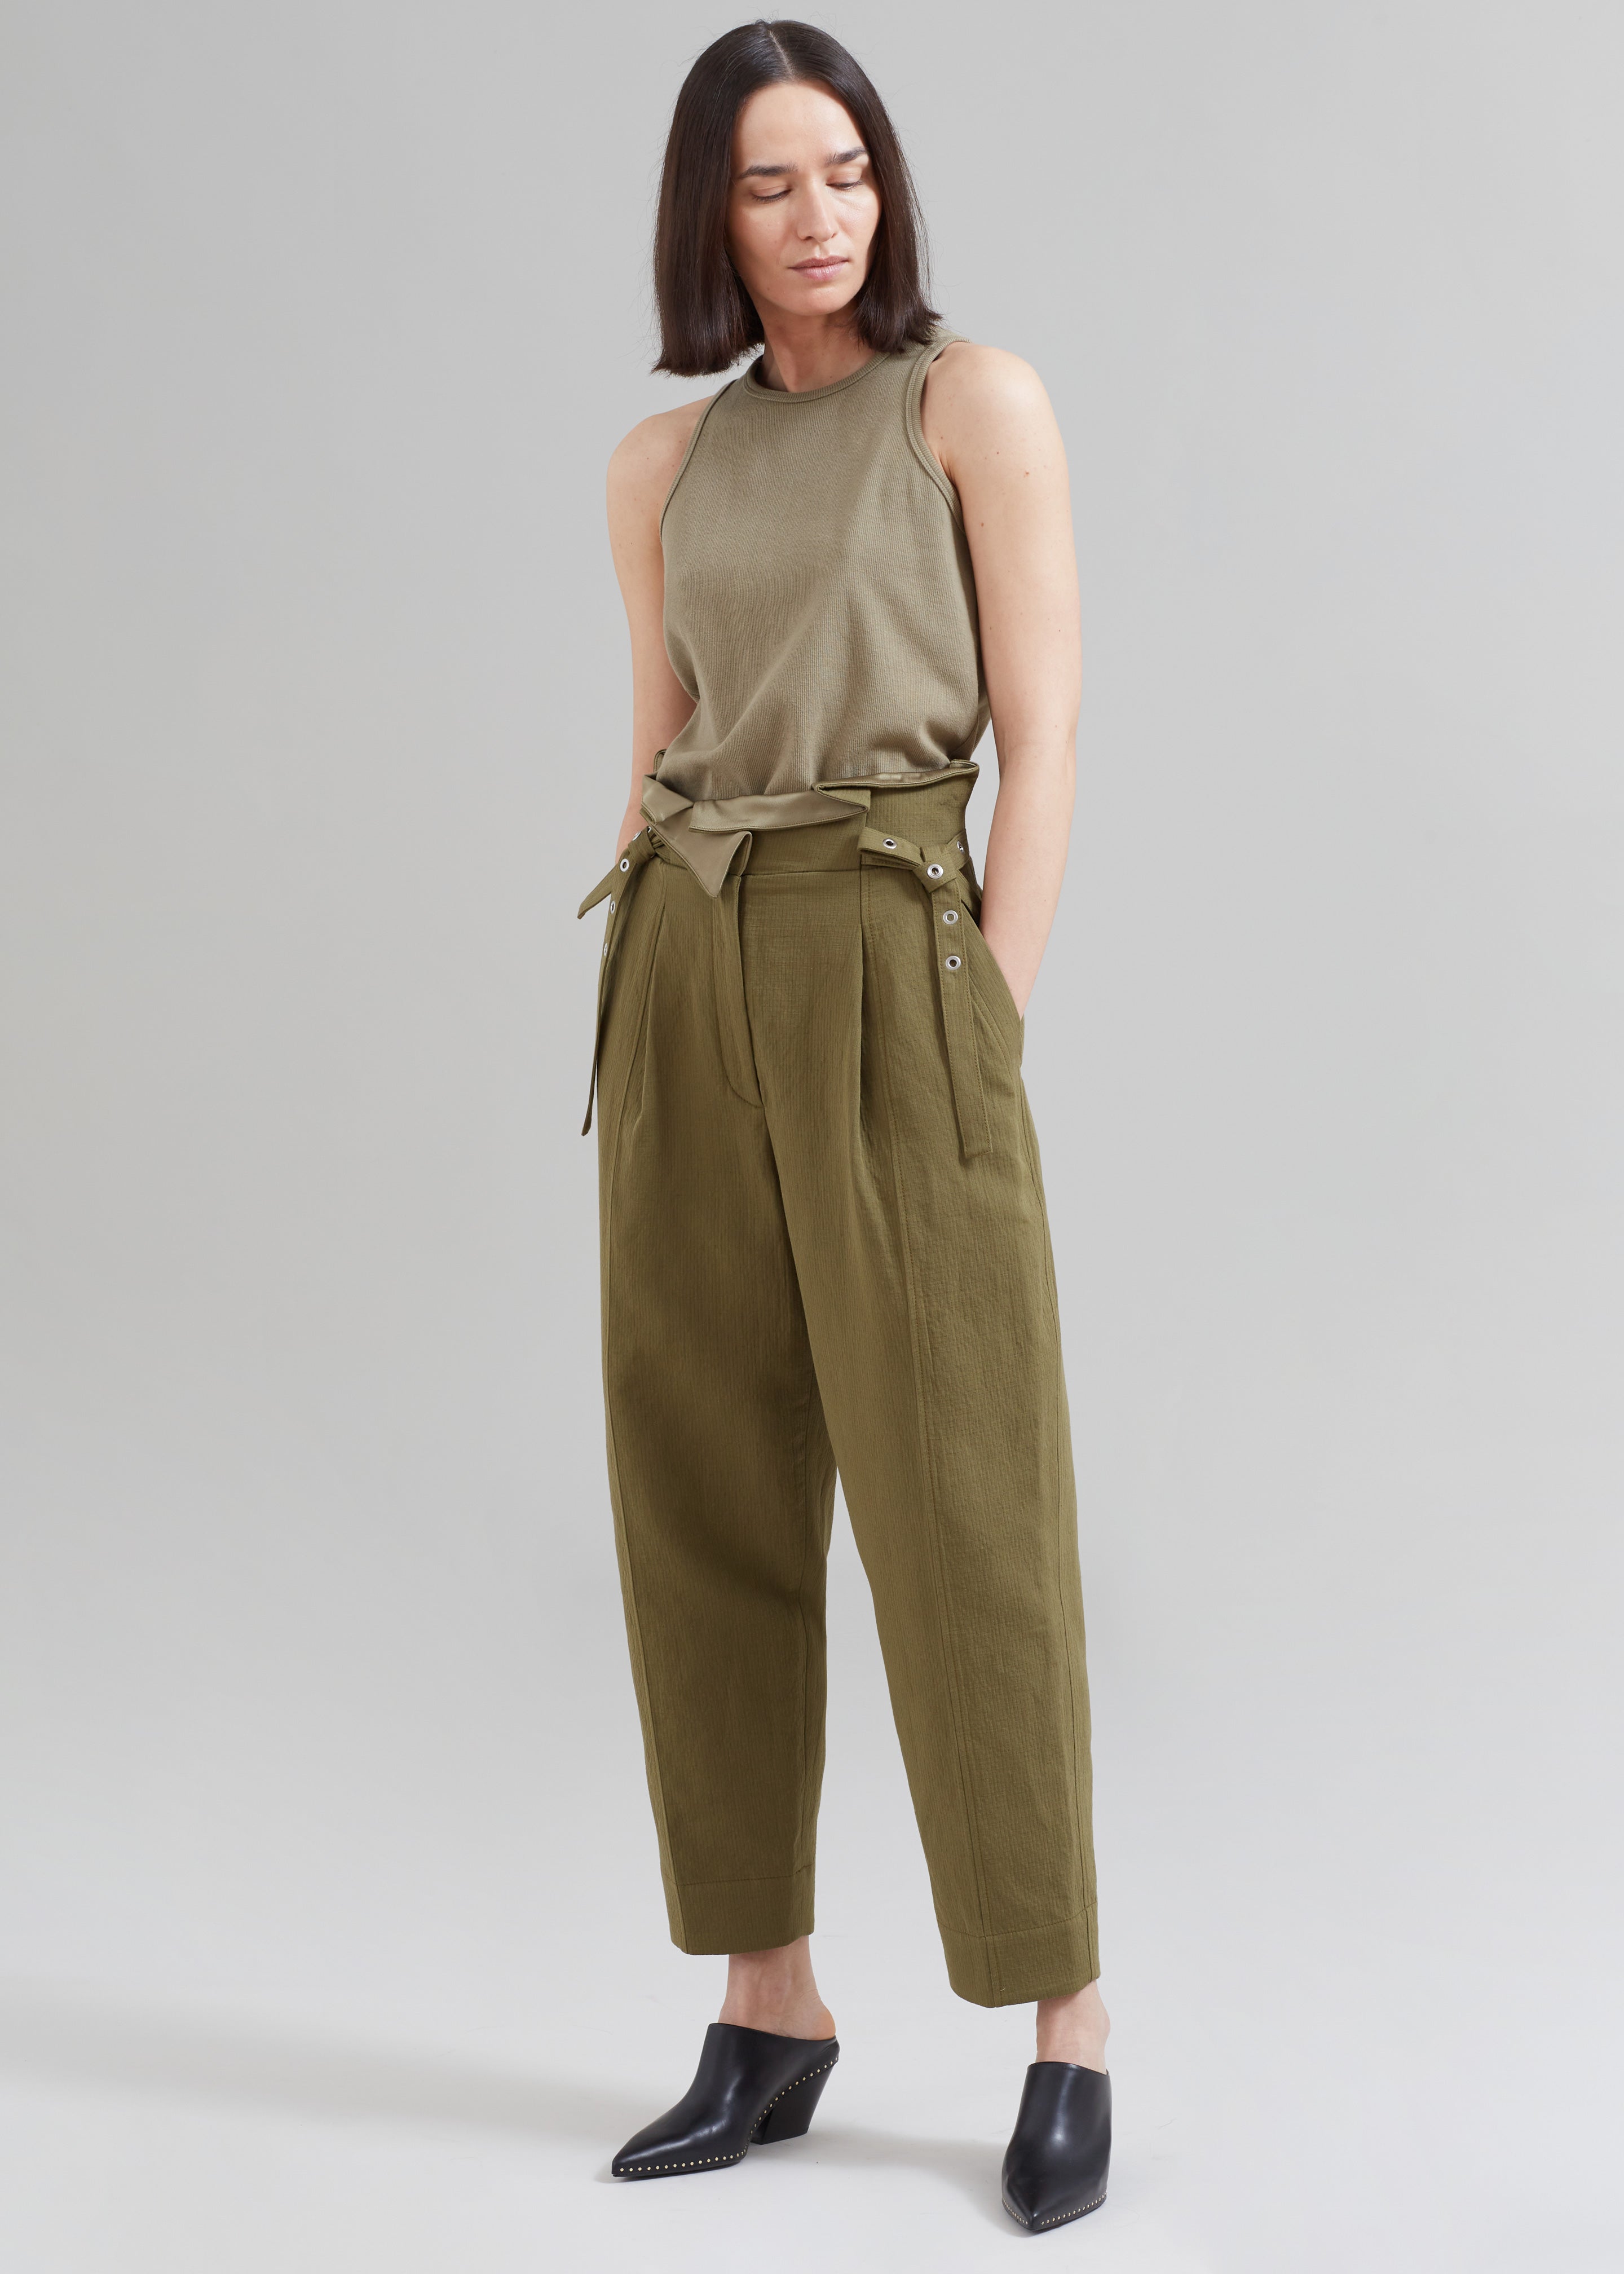 Womens Paper Bag Trousers | Next Official Site